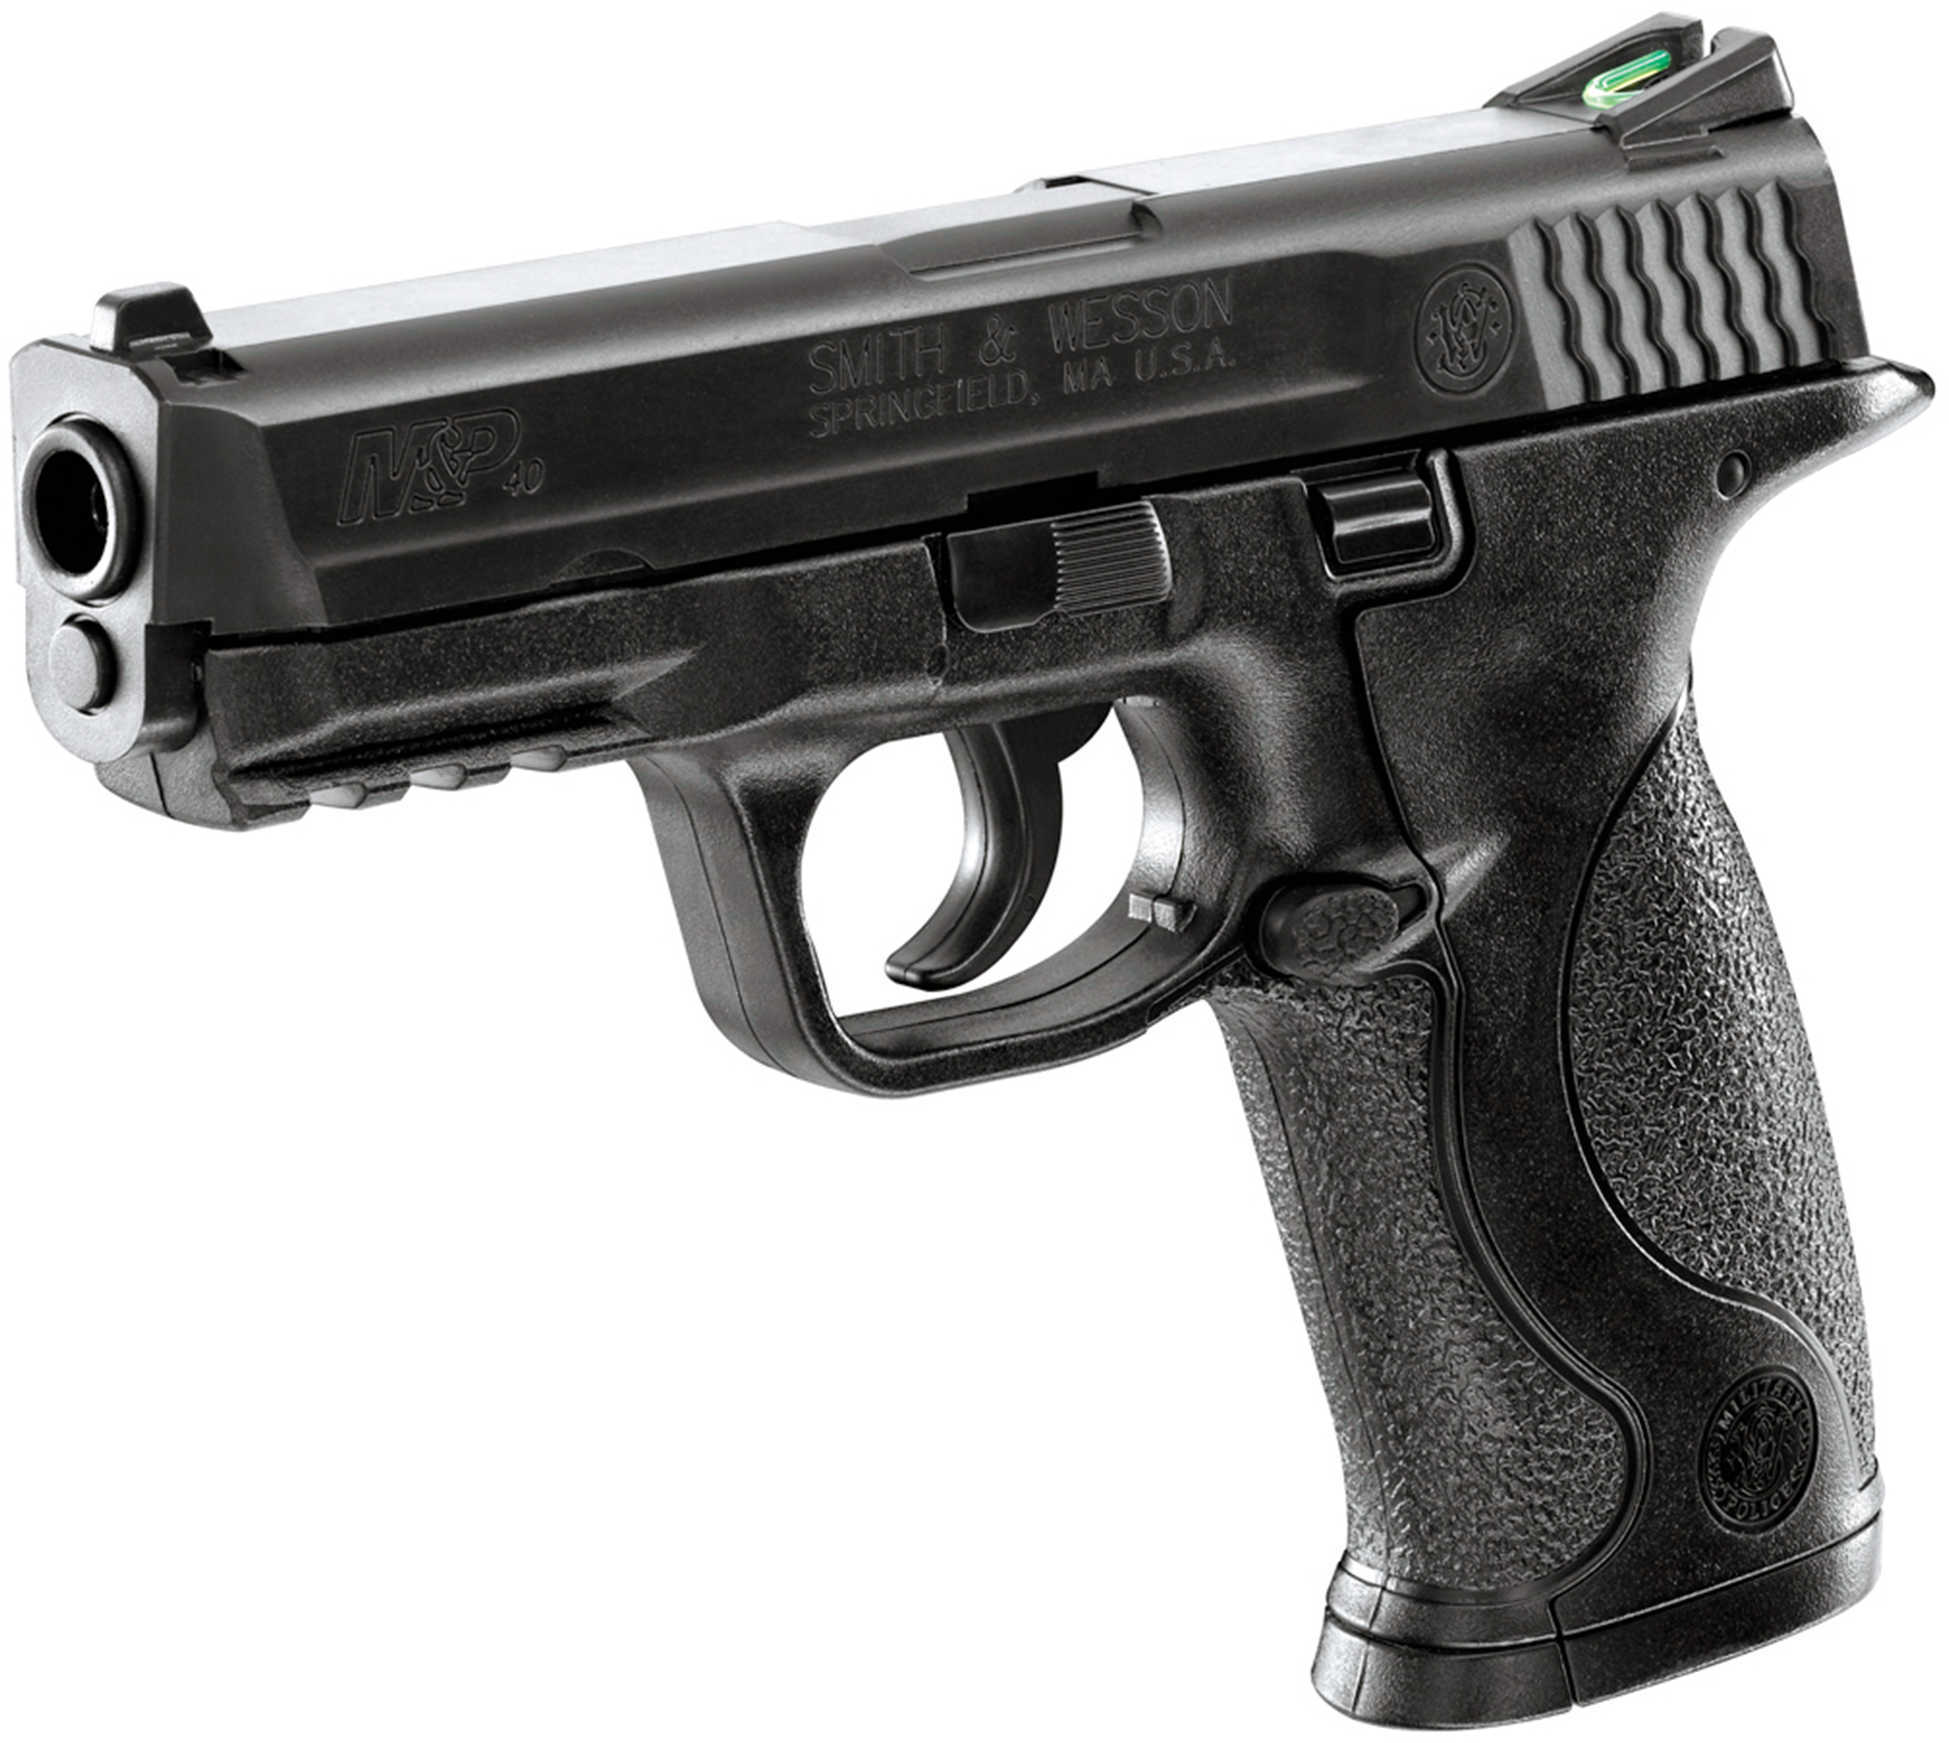 Umarex M&P Smith & Wesson .177 BB 4.25" Barrel Black Synthetic Grips CO2 Powered 19Rd 480 Feet Per Second 2255050